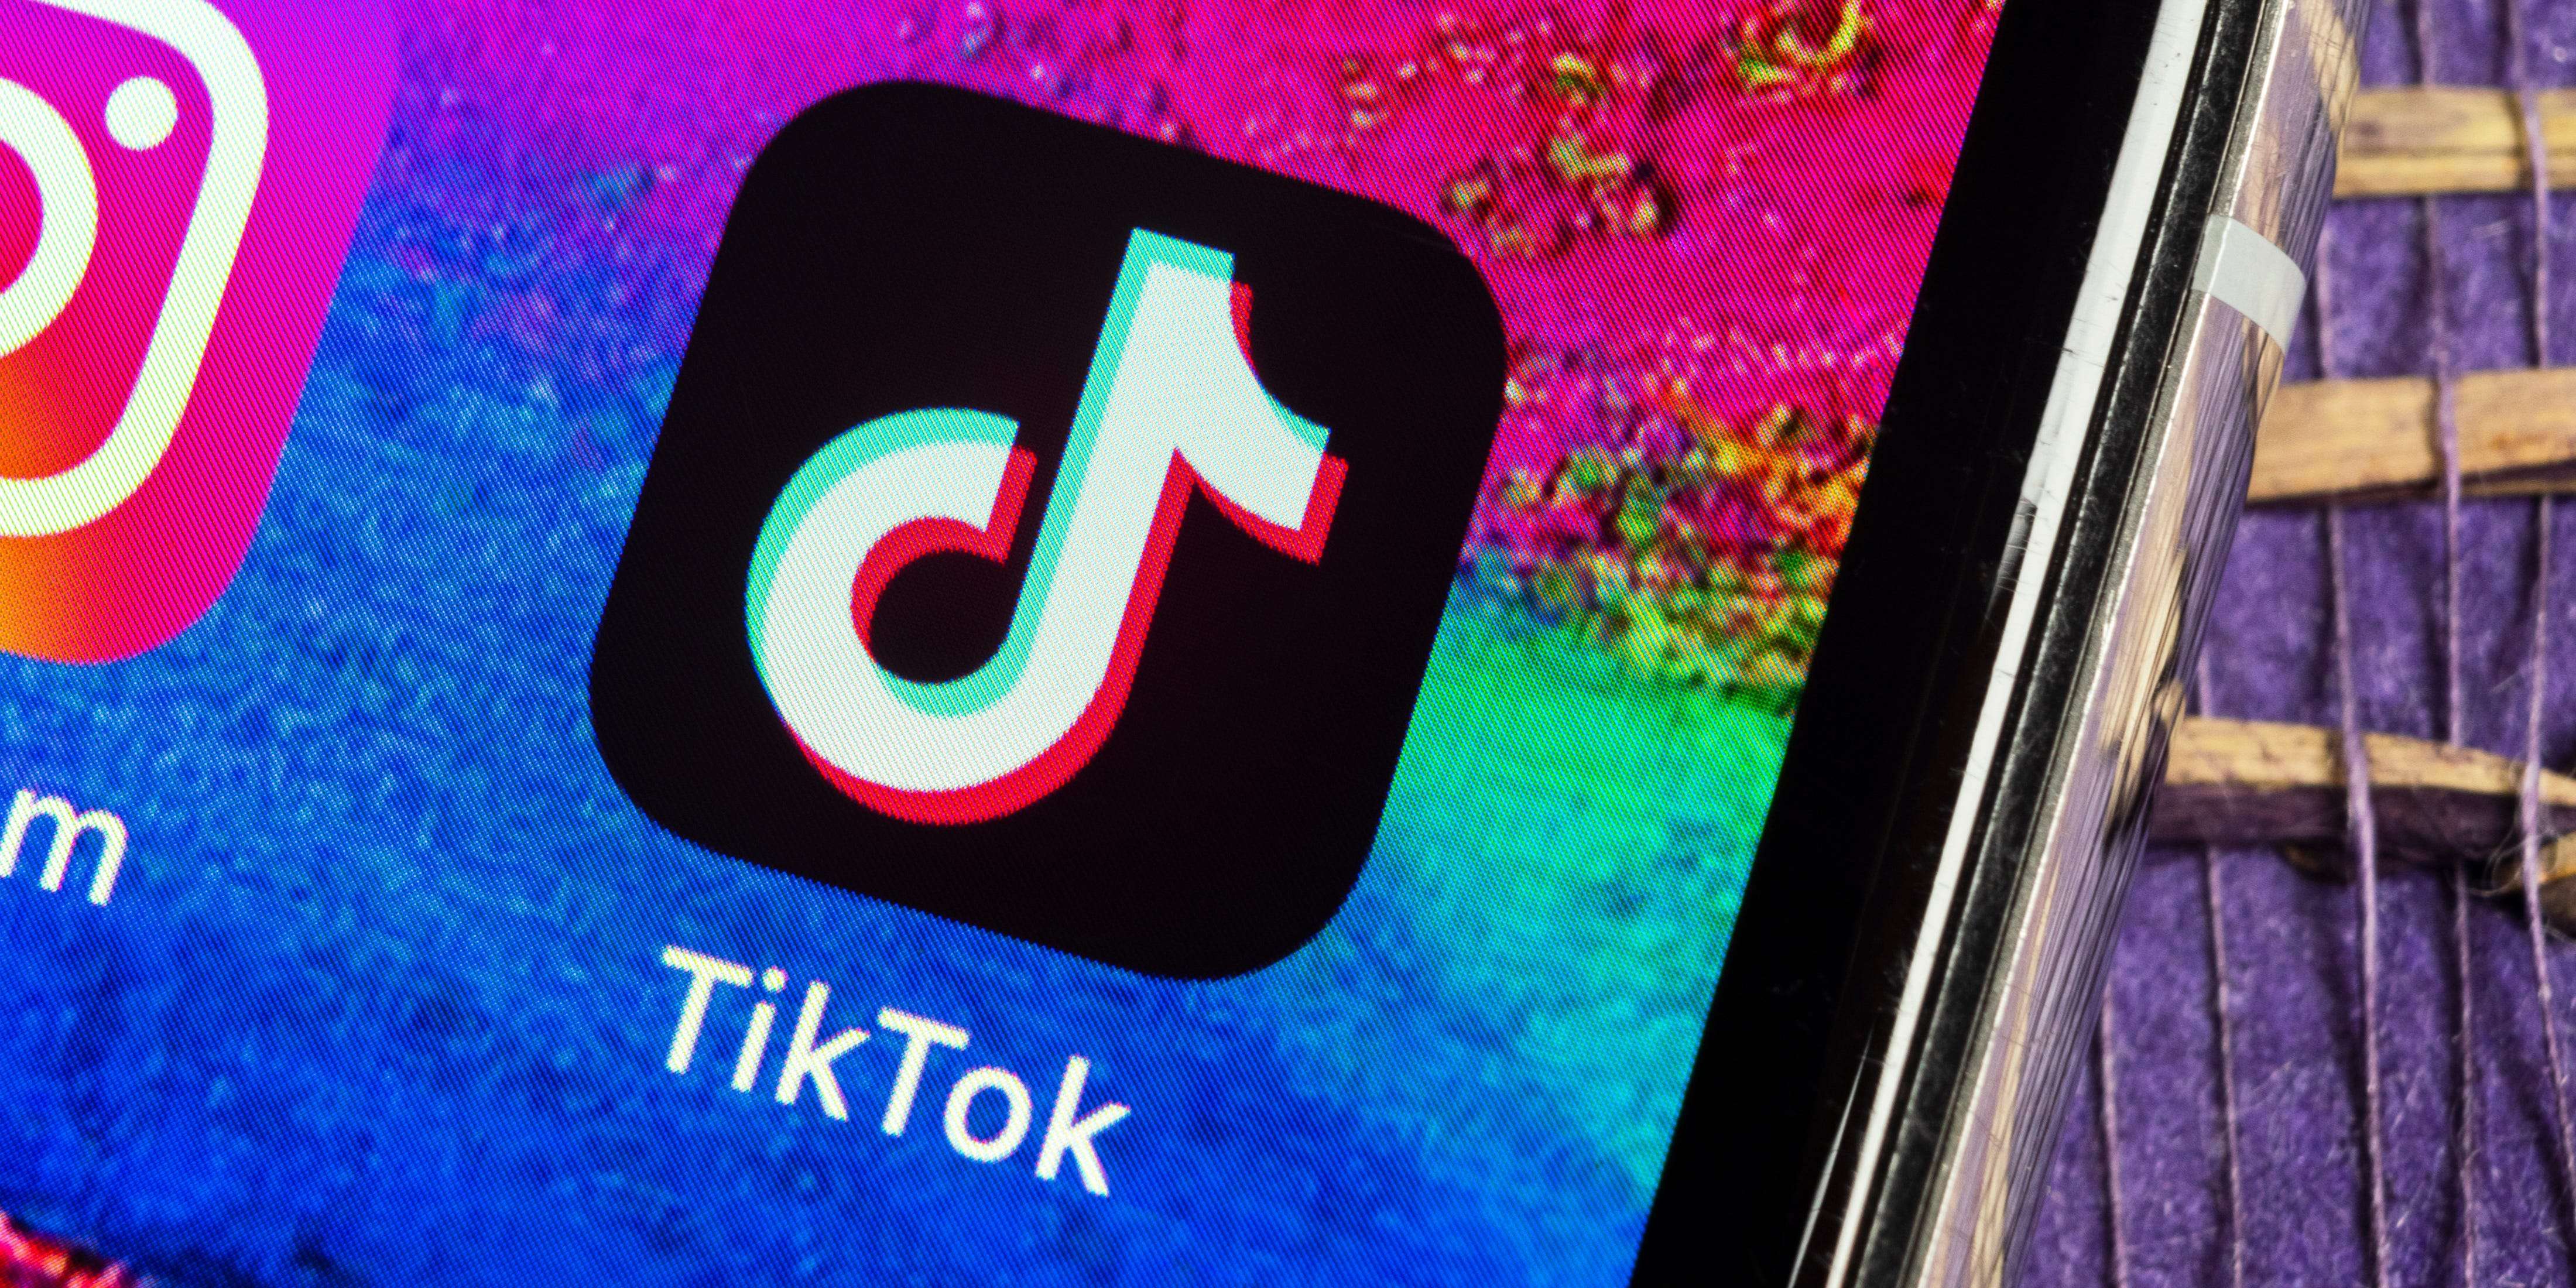 How to search on TikTok to find specific videos, users, hashtags, and